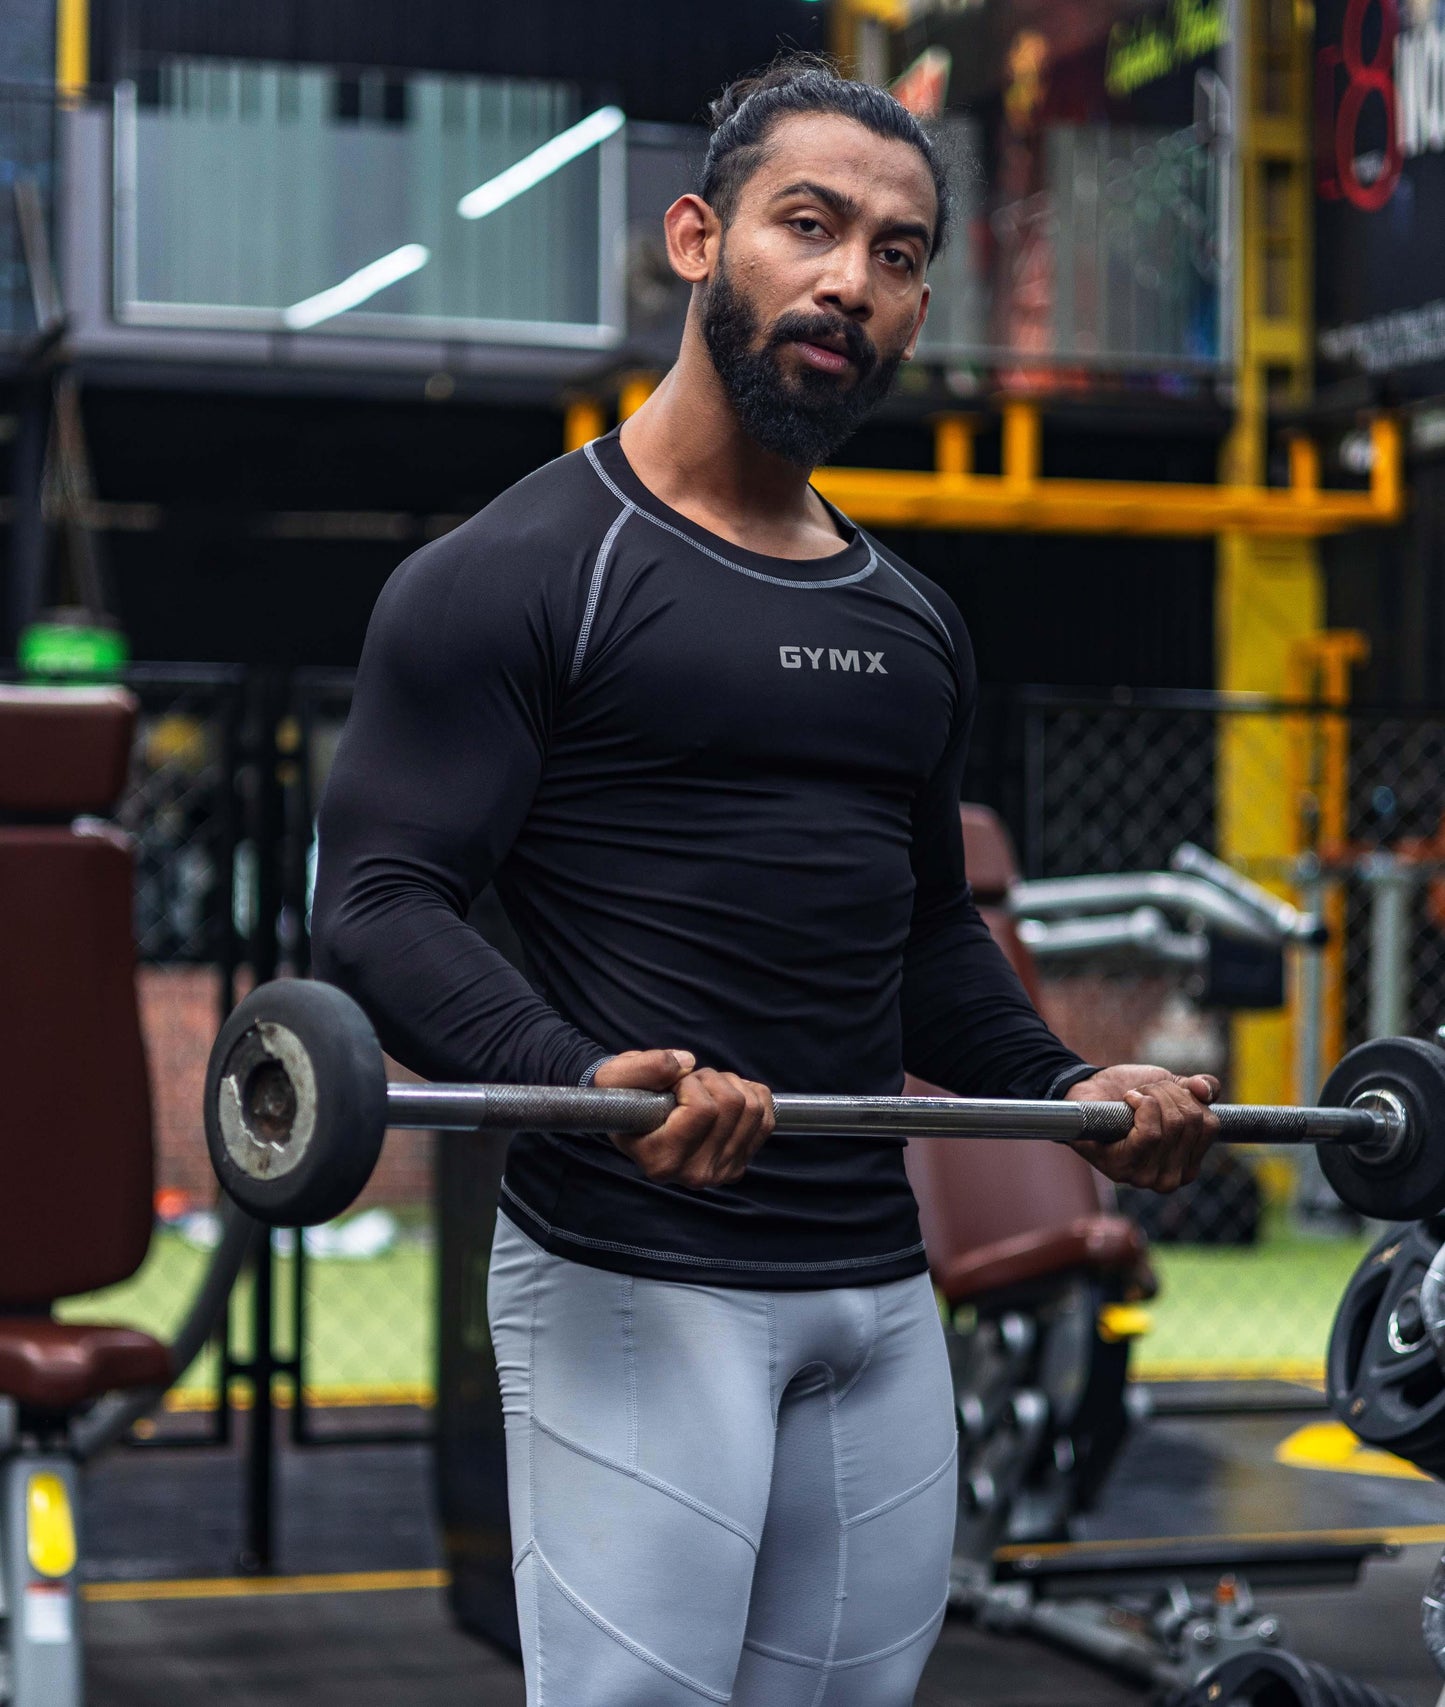 Compression GymX Full Sleeve Tee: Black